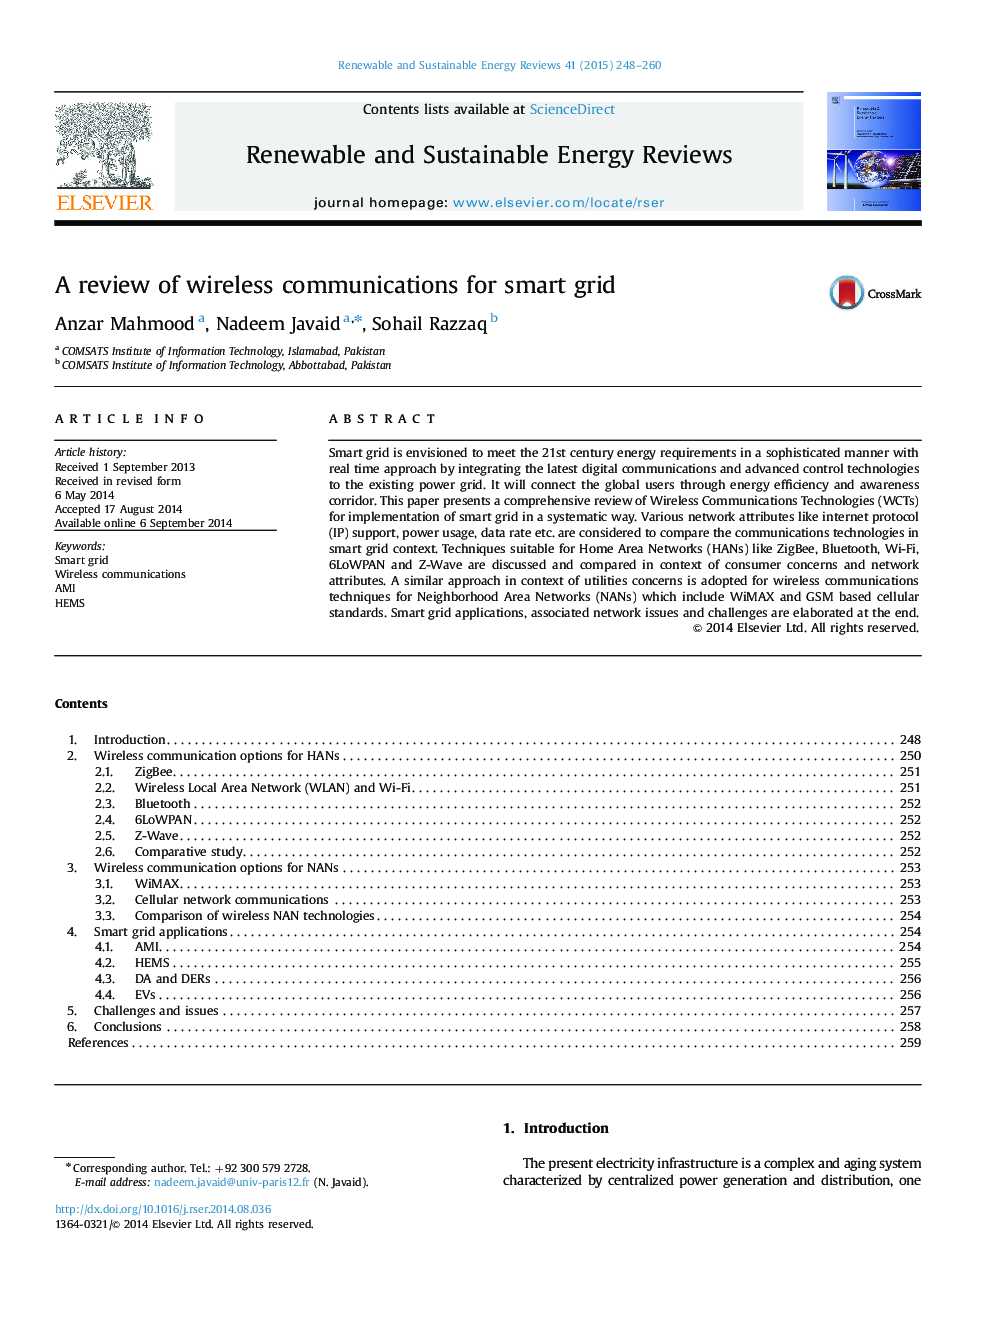 A review of wireless communications for smart grid